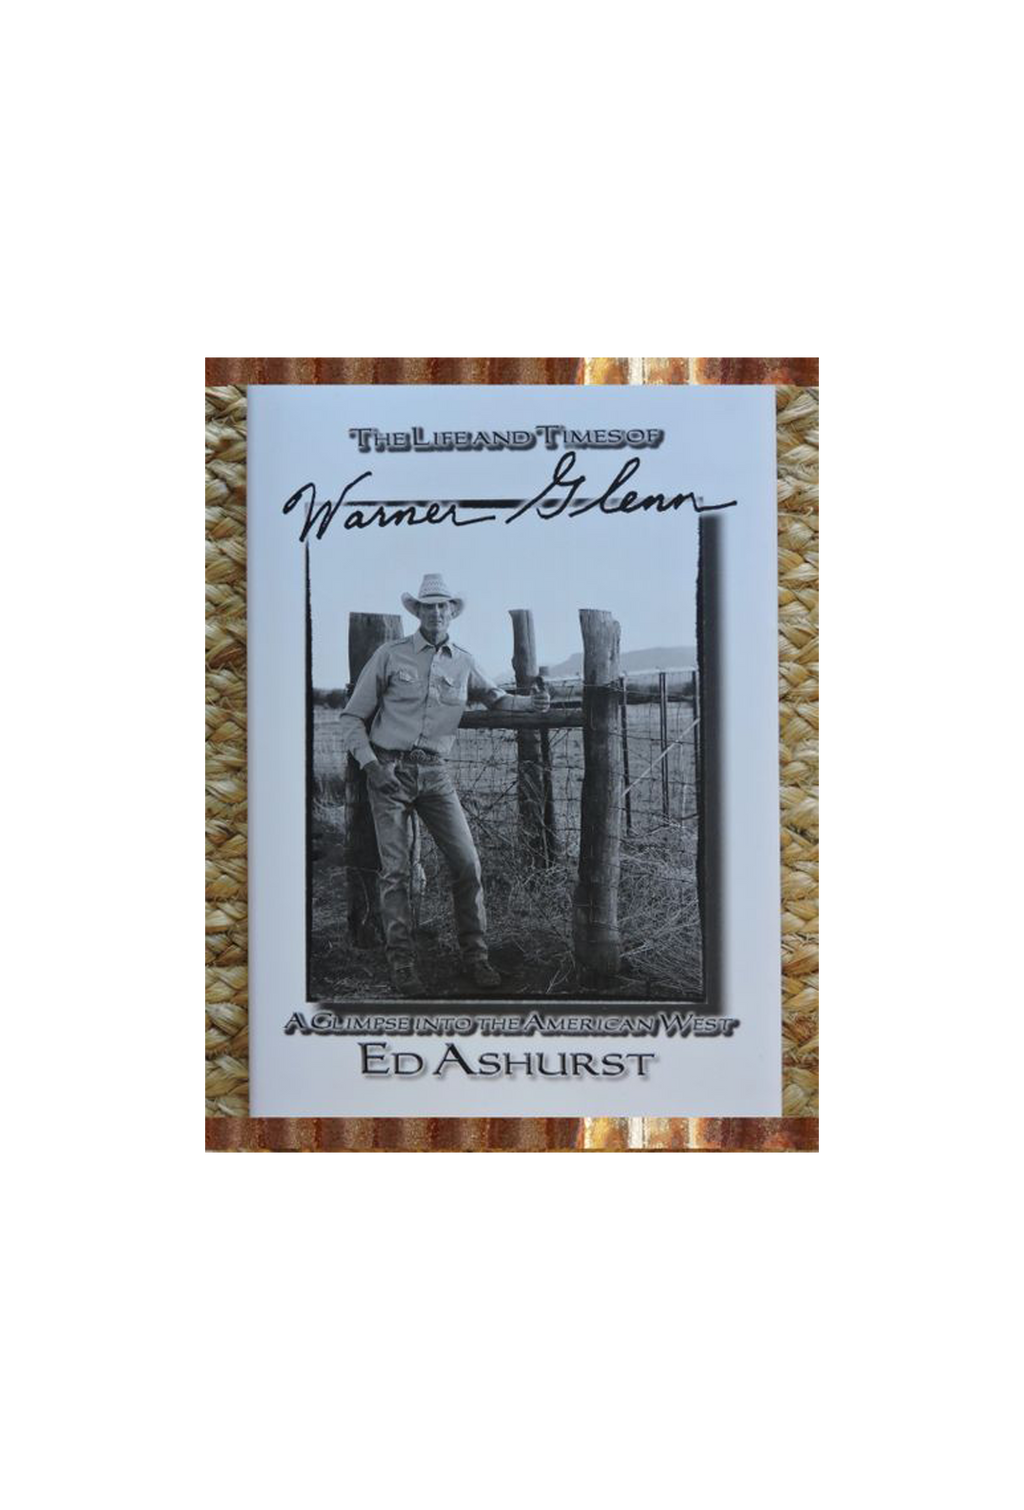 "The Life and Times of Warner Glenn" Book by Ed Ashurst